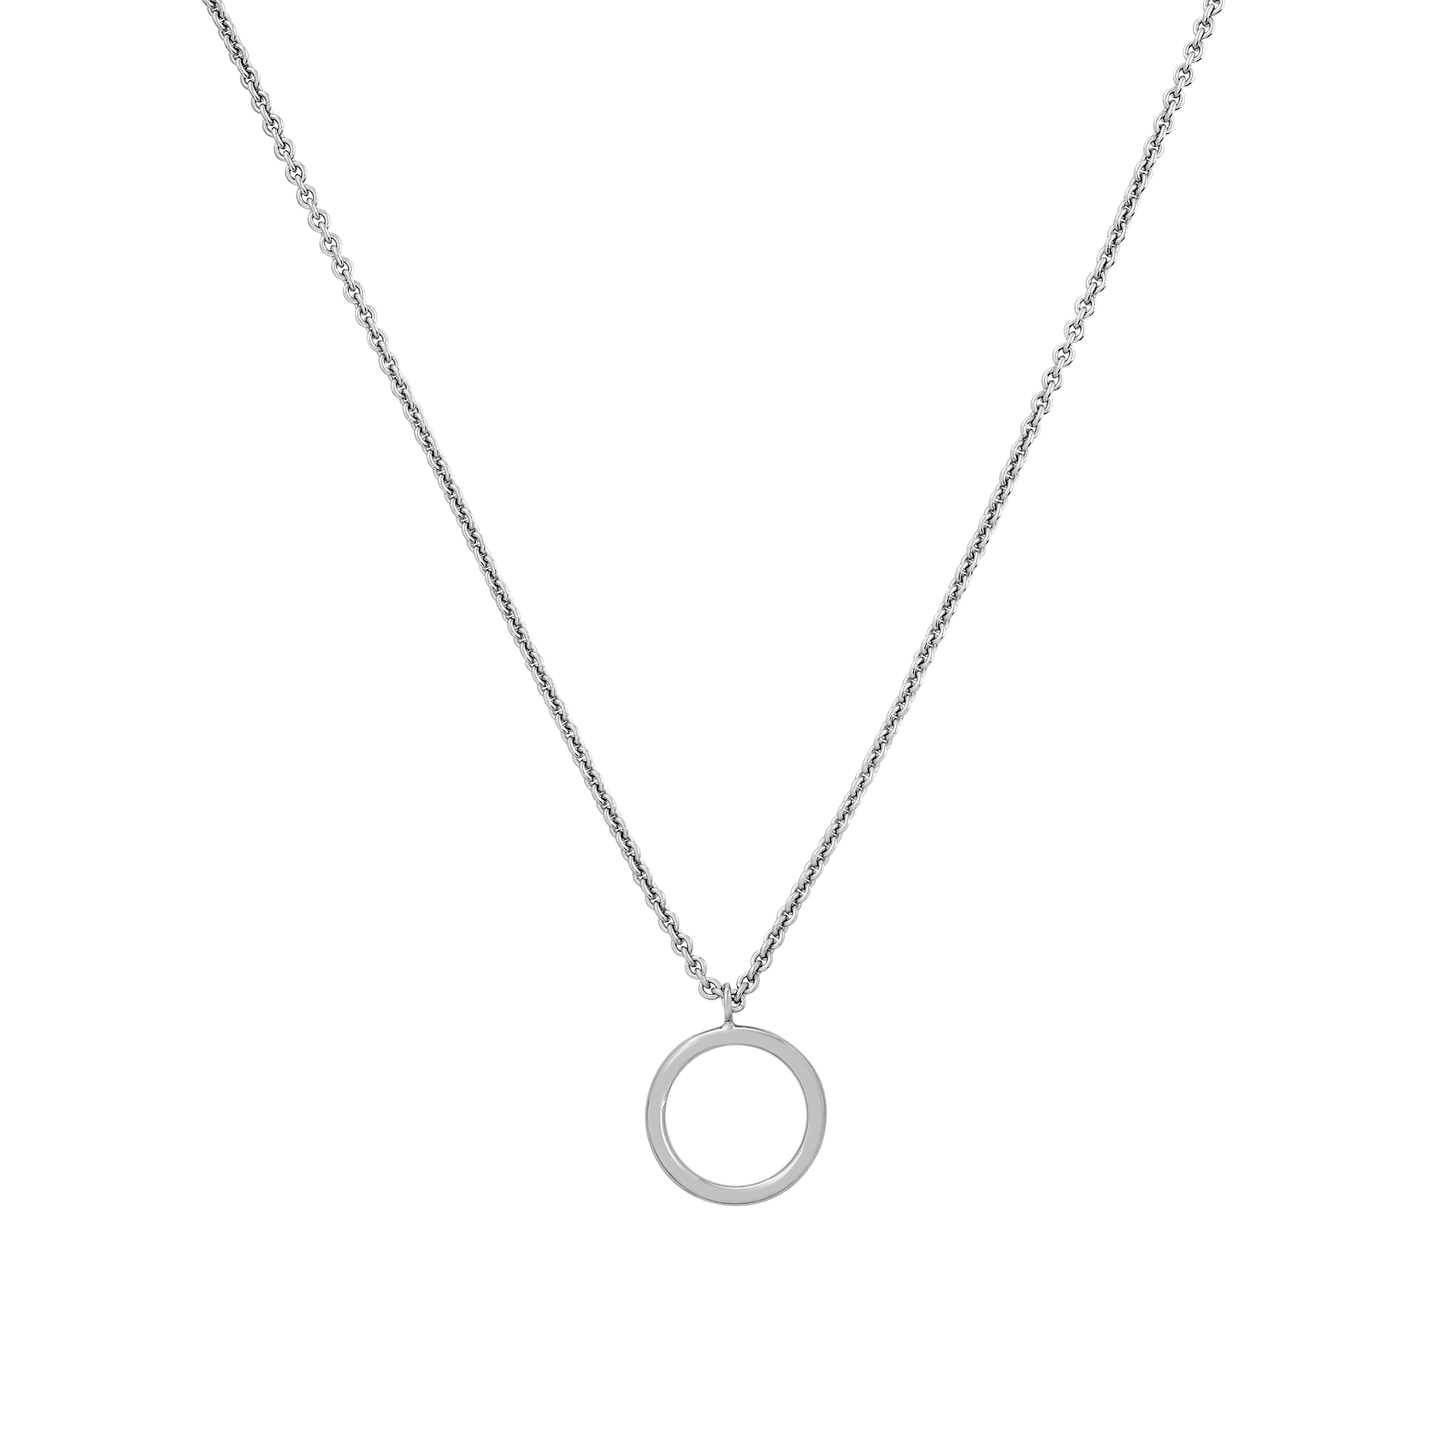 Orion Small Necklace